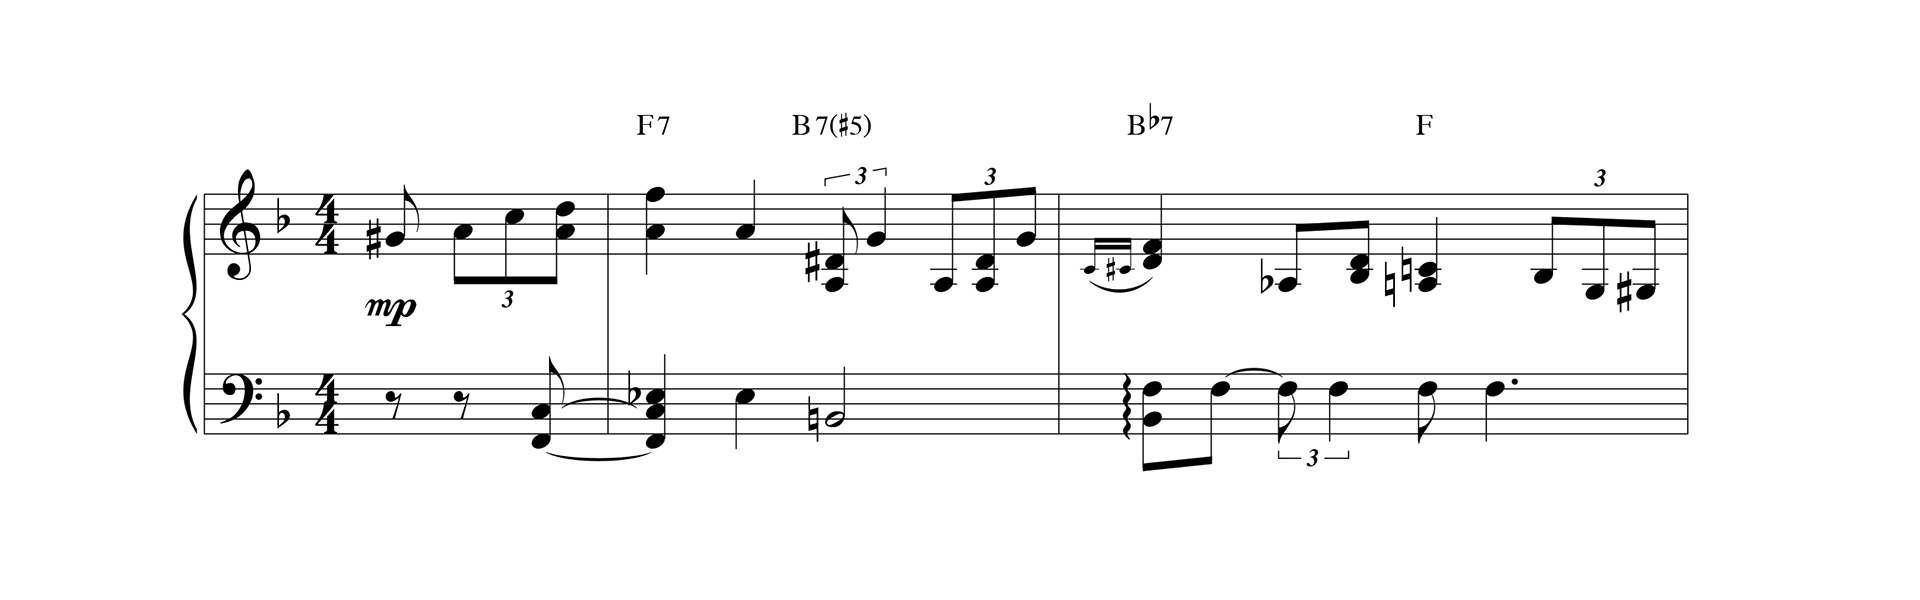 Chromatic Passing Chord Above